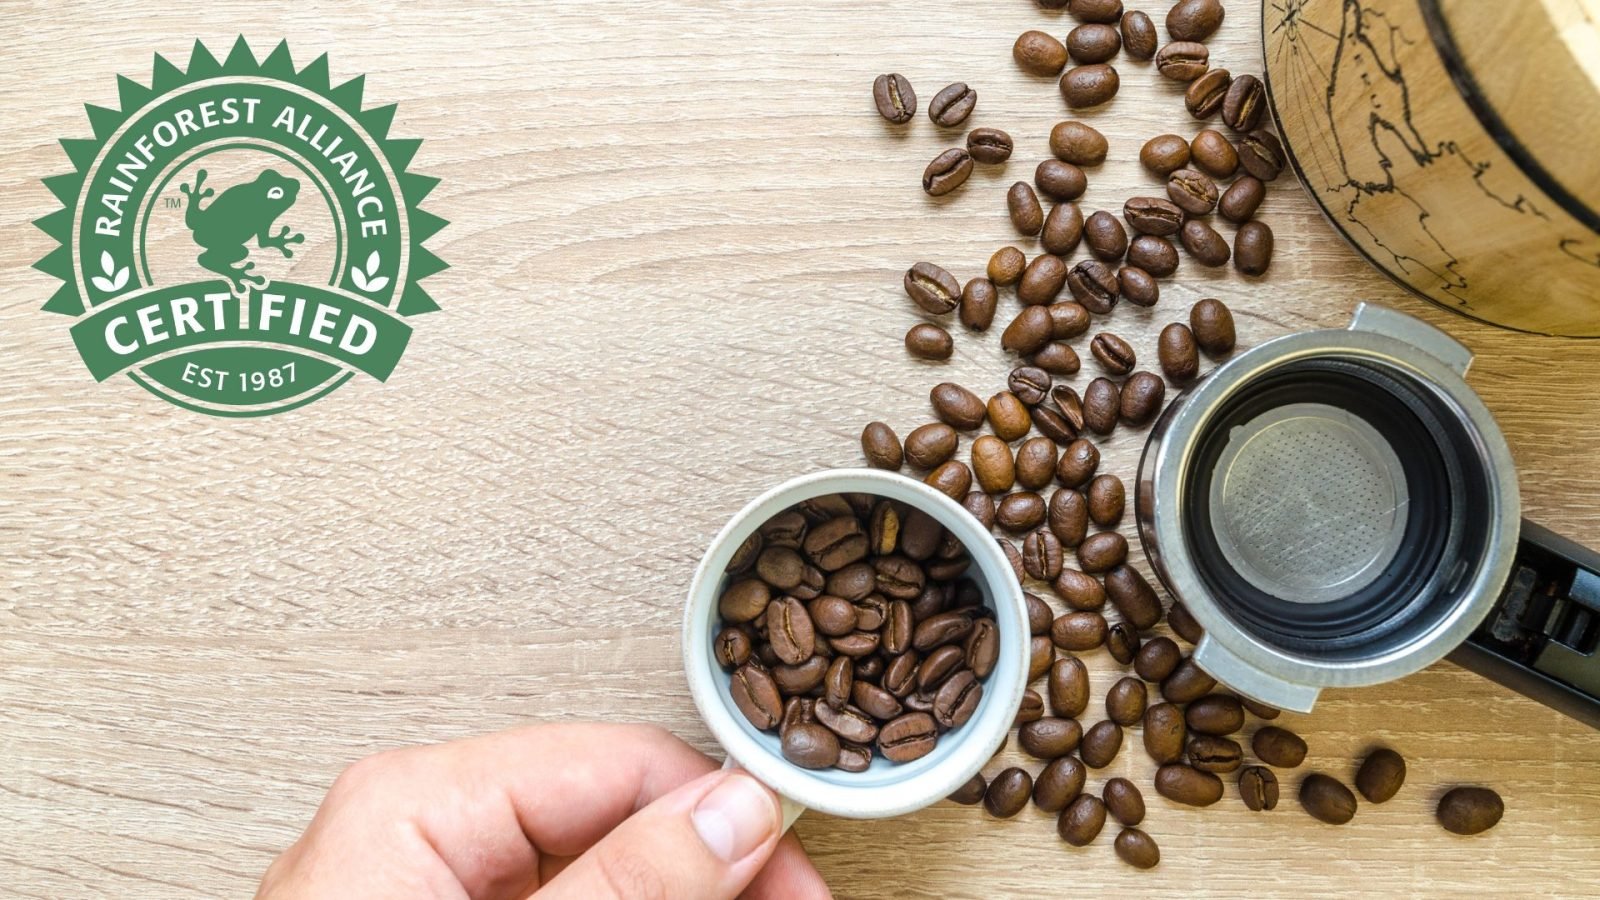 Rainforest Alliance Certified Coffee, What Is It and Why Important